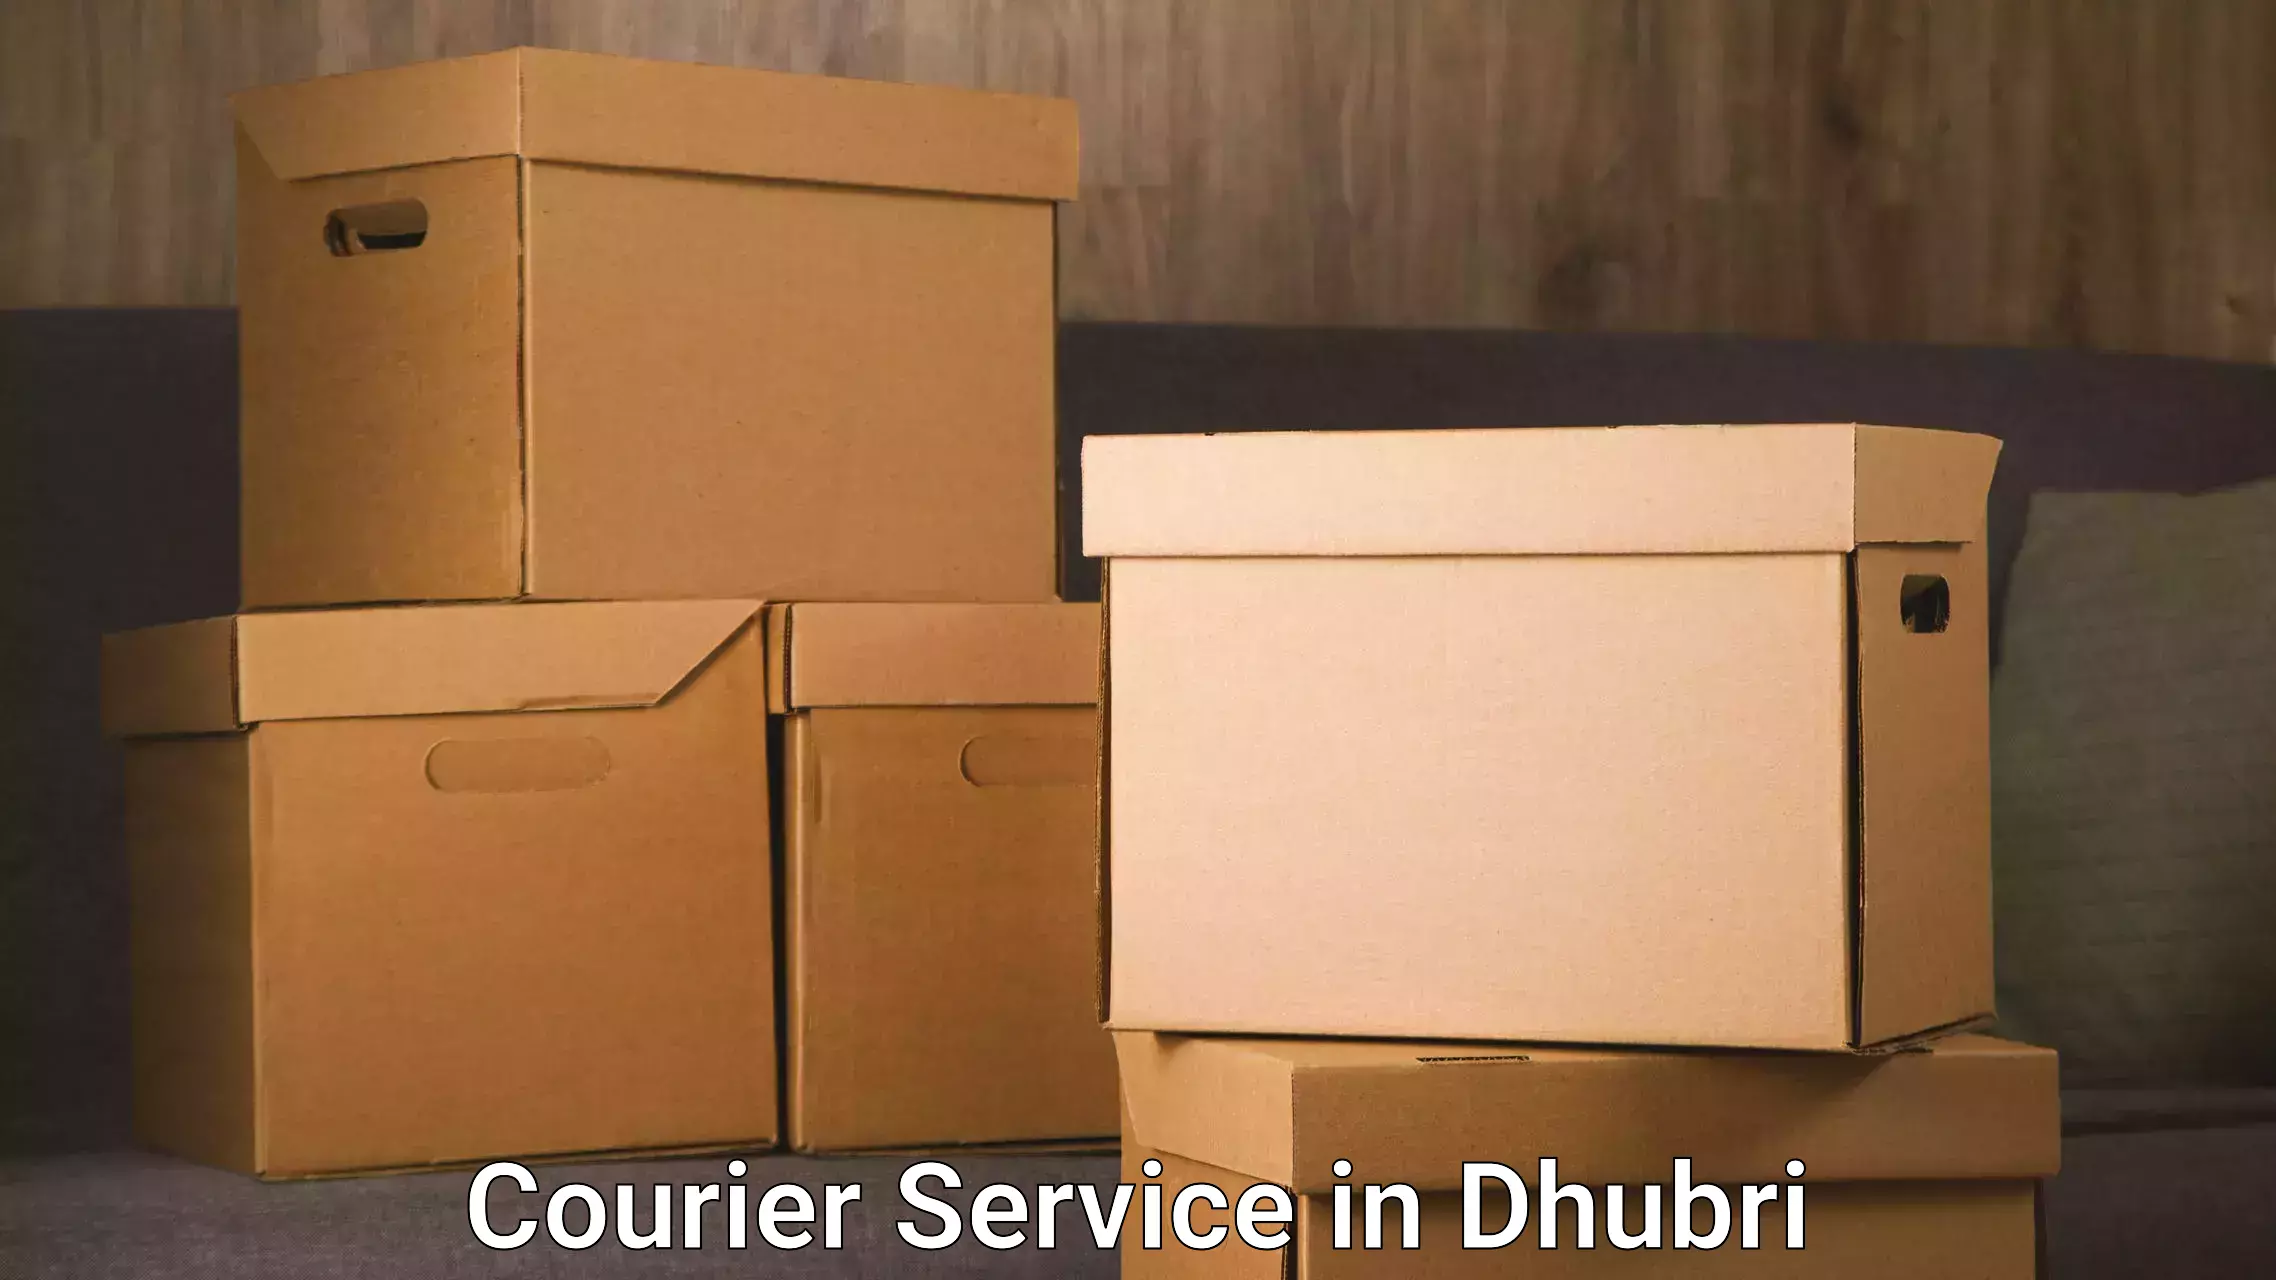 Seamless shipping experience in Dhubri